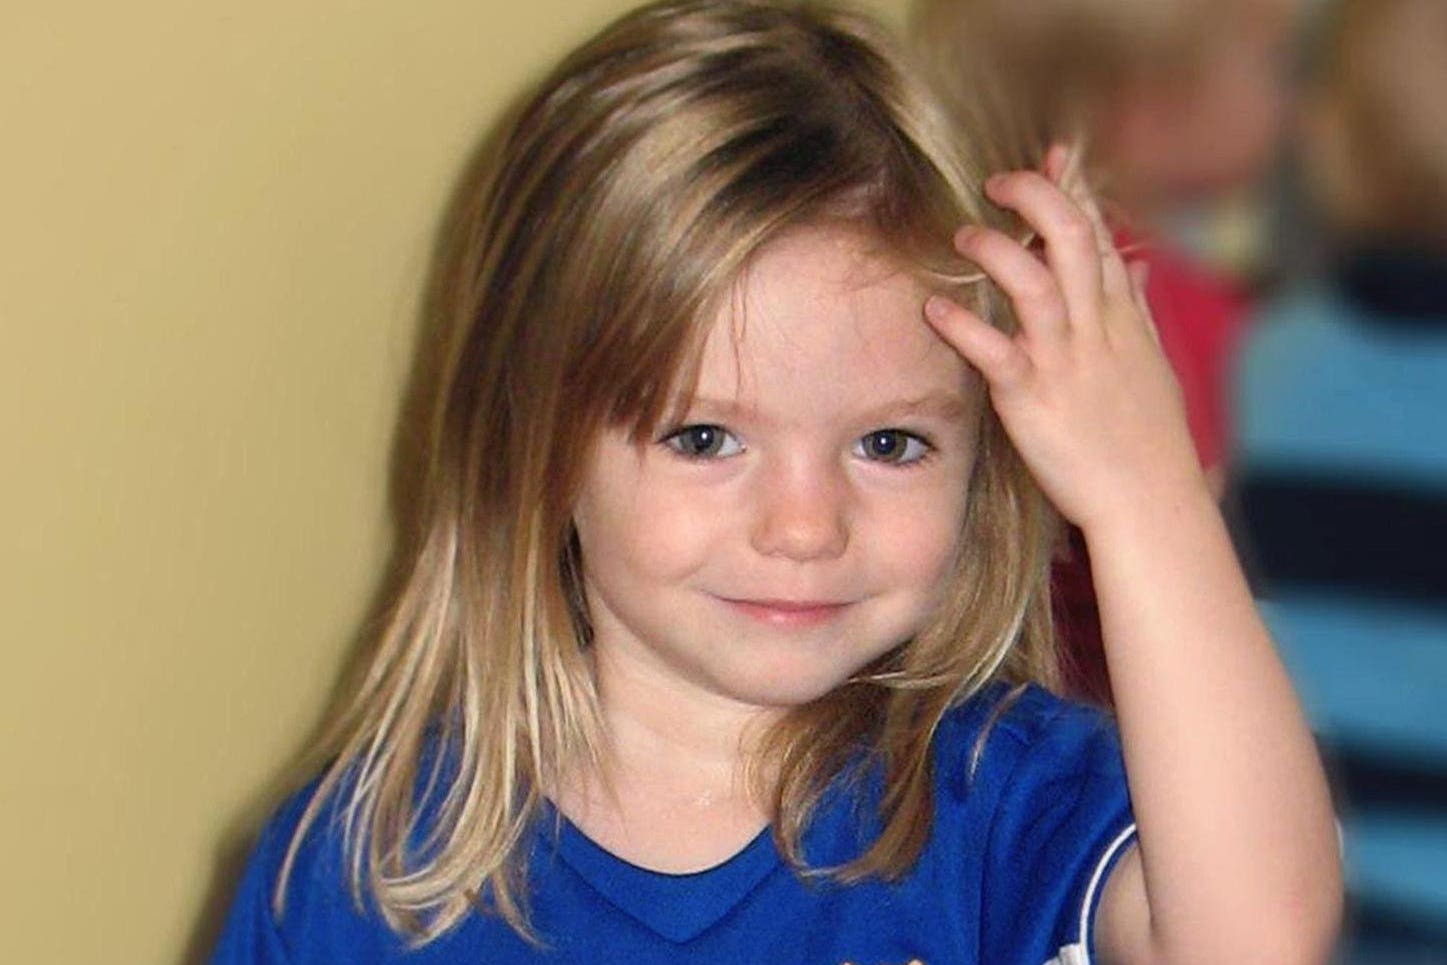 Madeleine McCann vanished while on holiday with her family